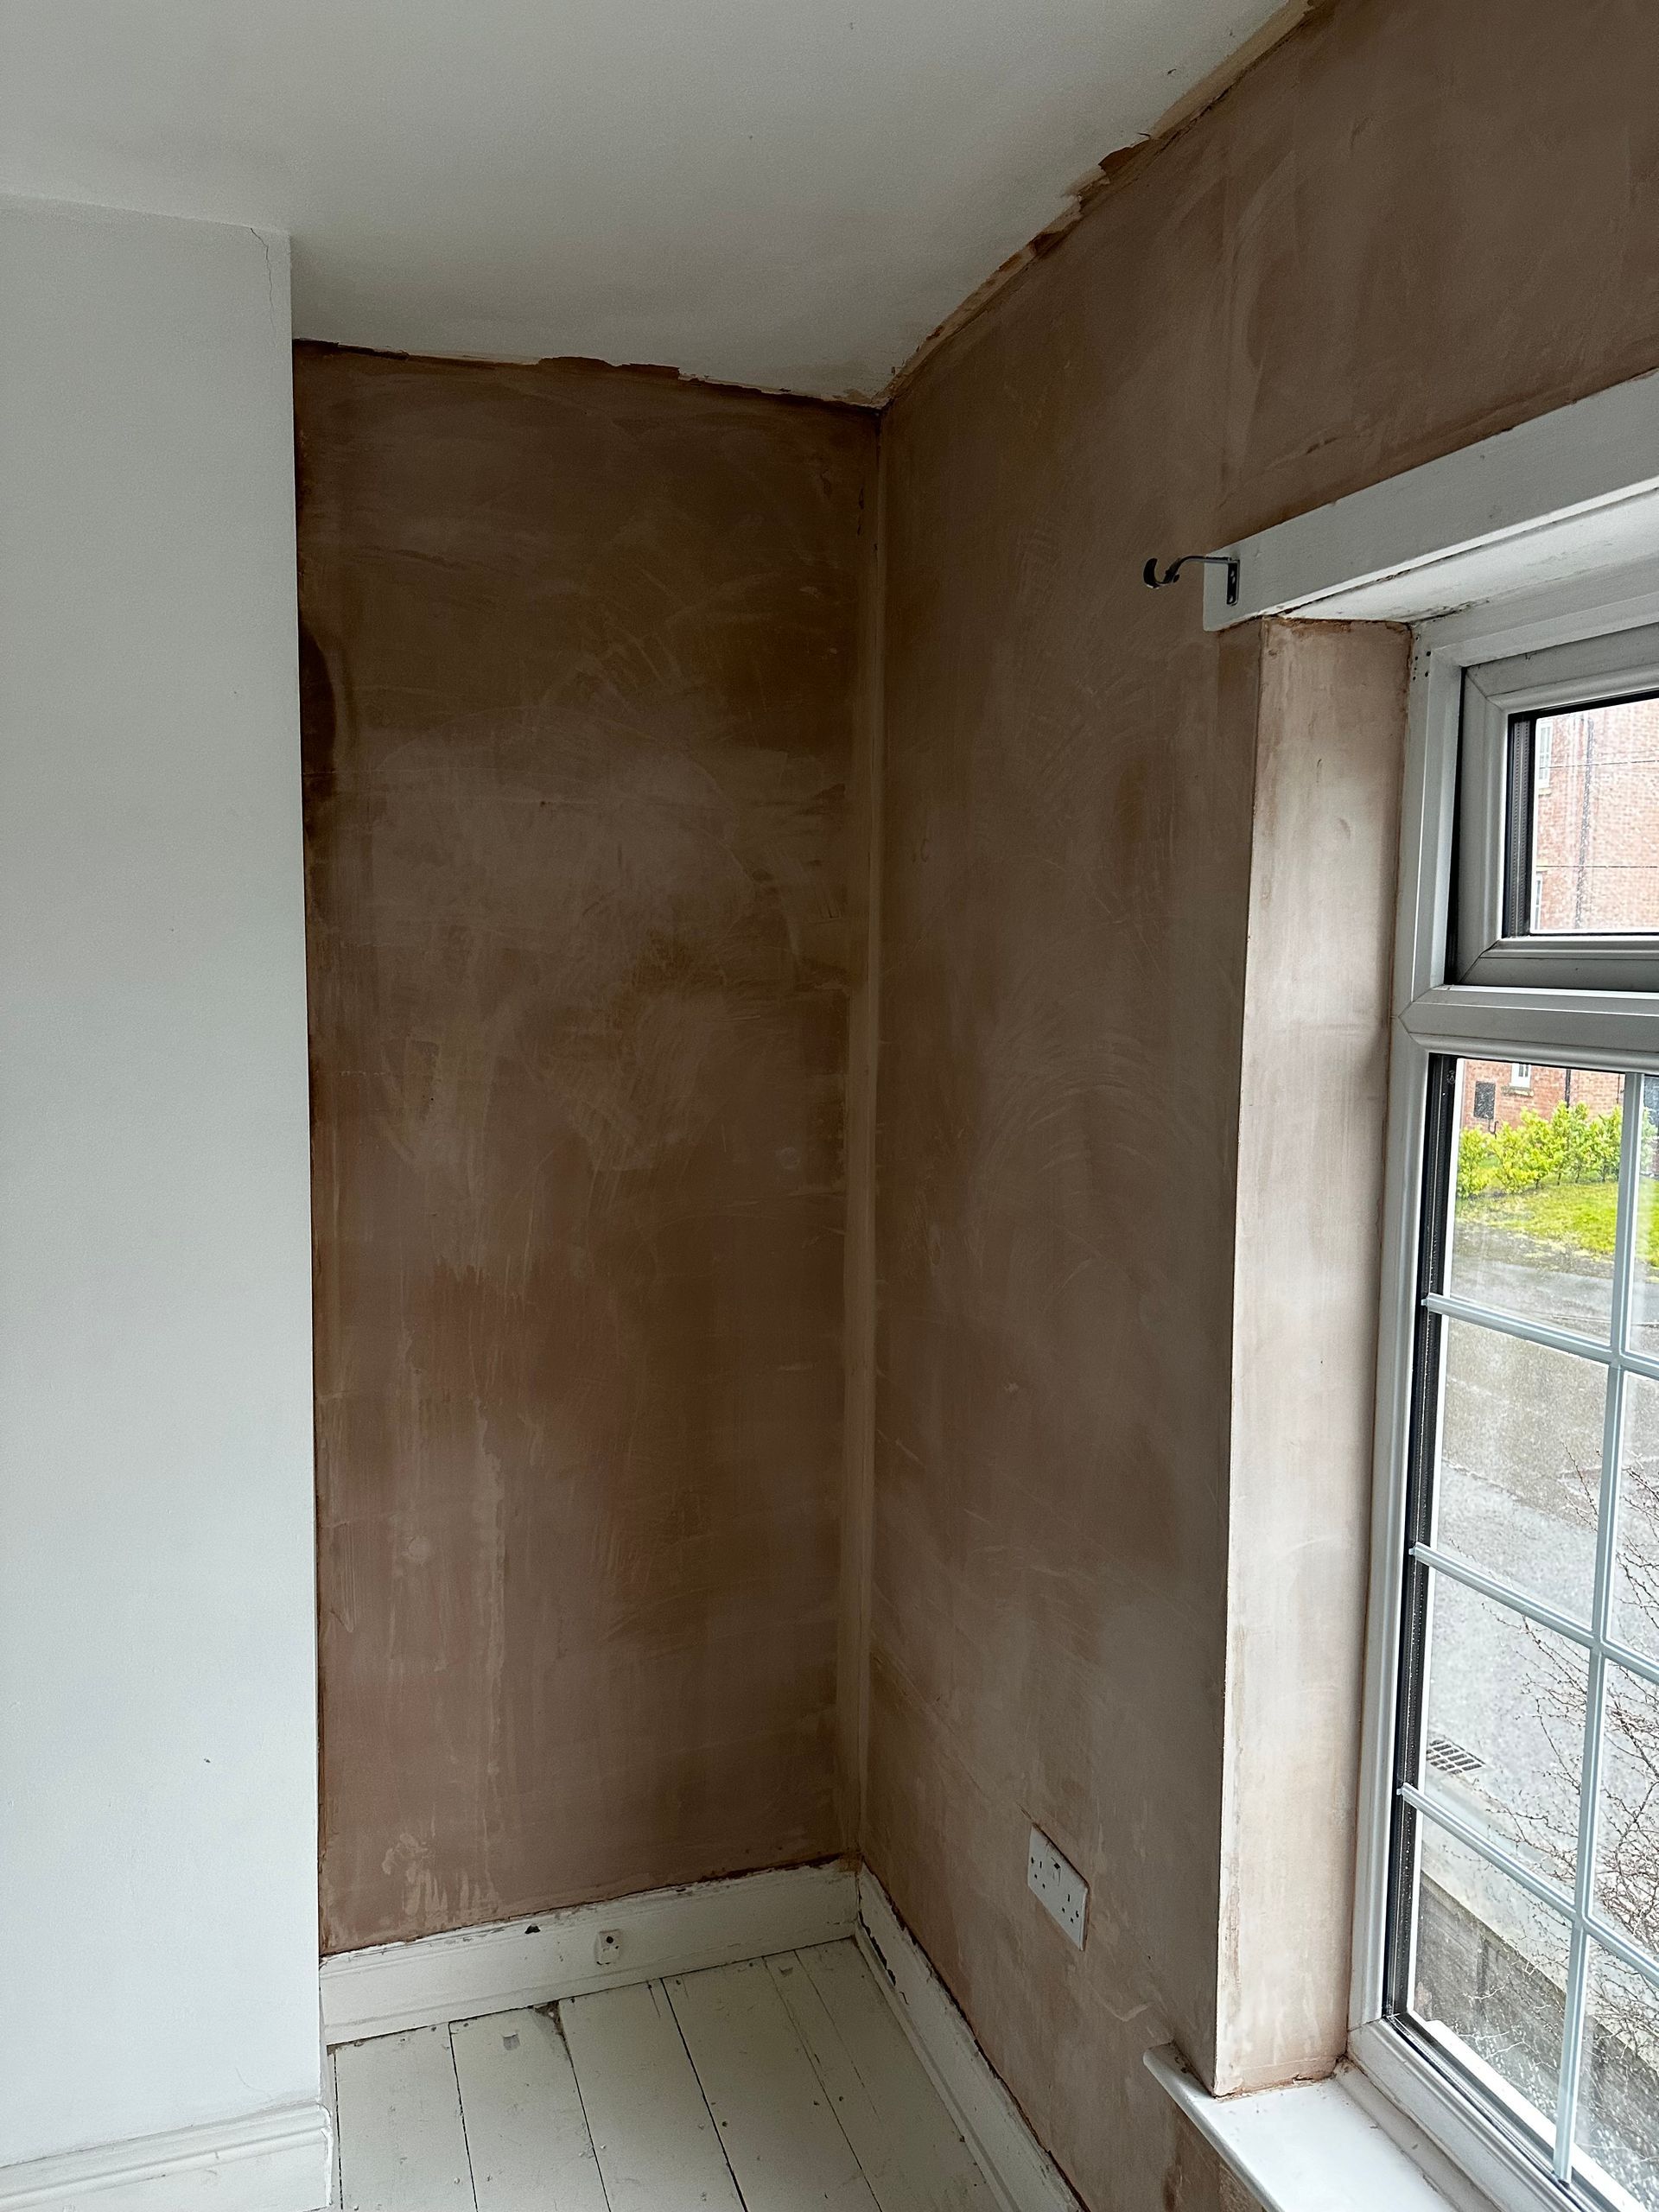 Re-plastering to solid wall in Victorian property 